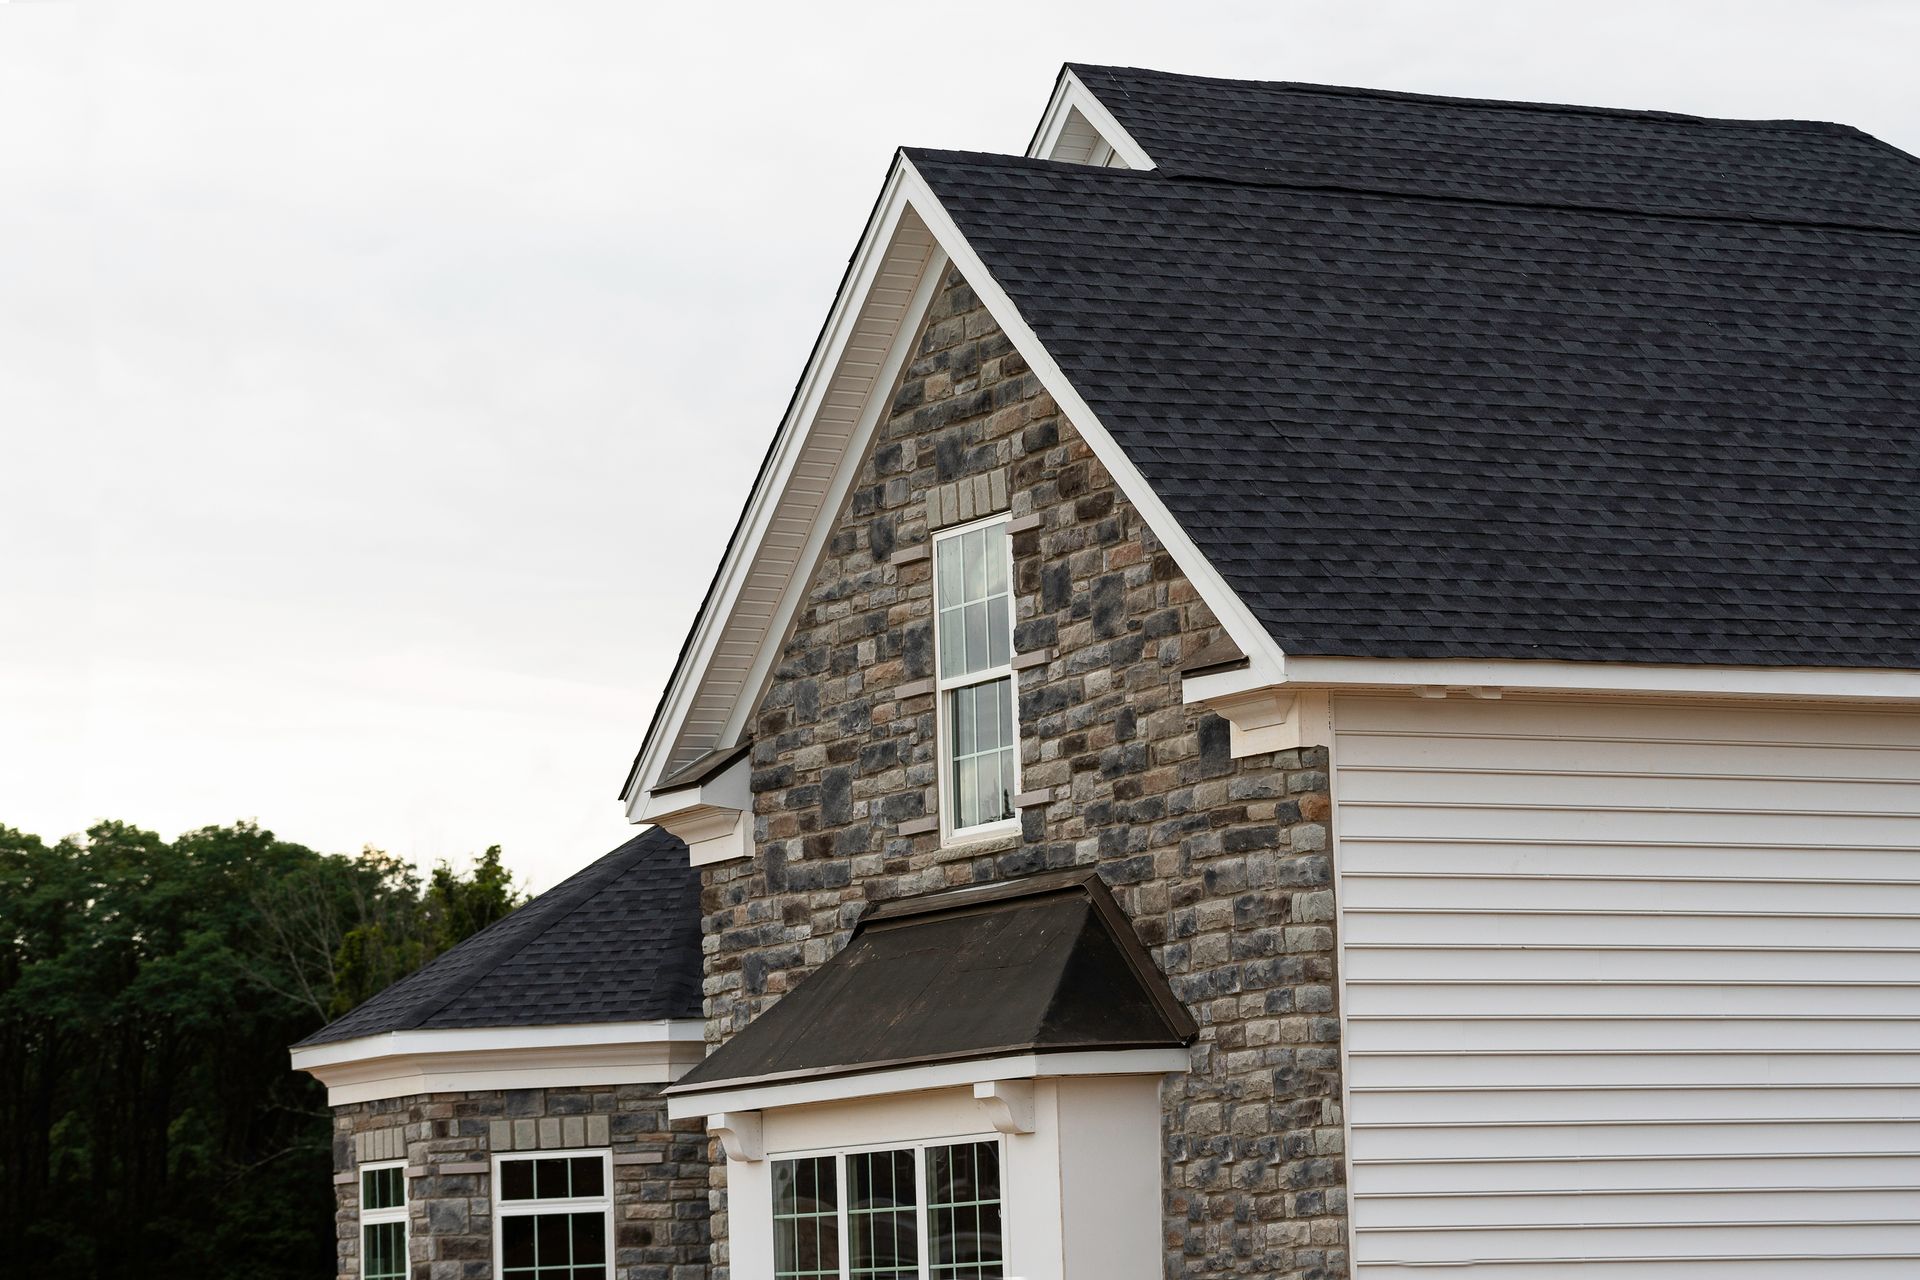 A stone house with a black roof and white siding